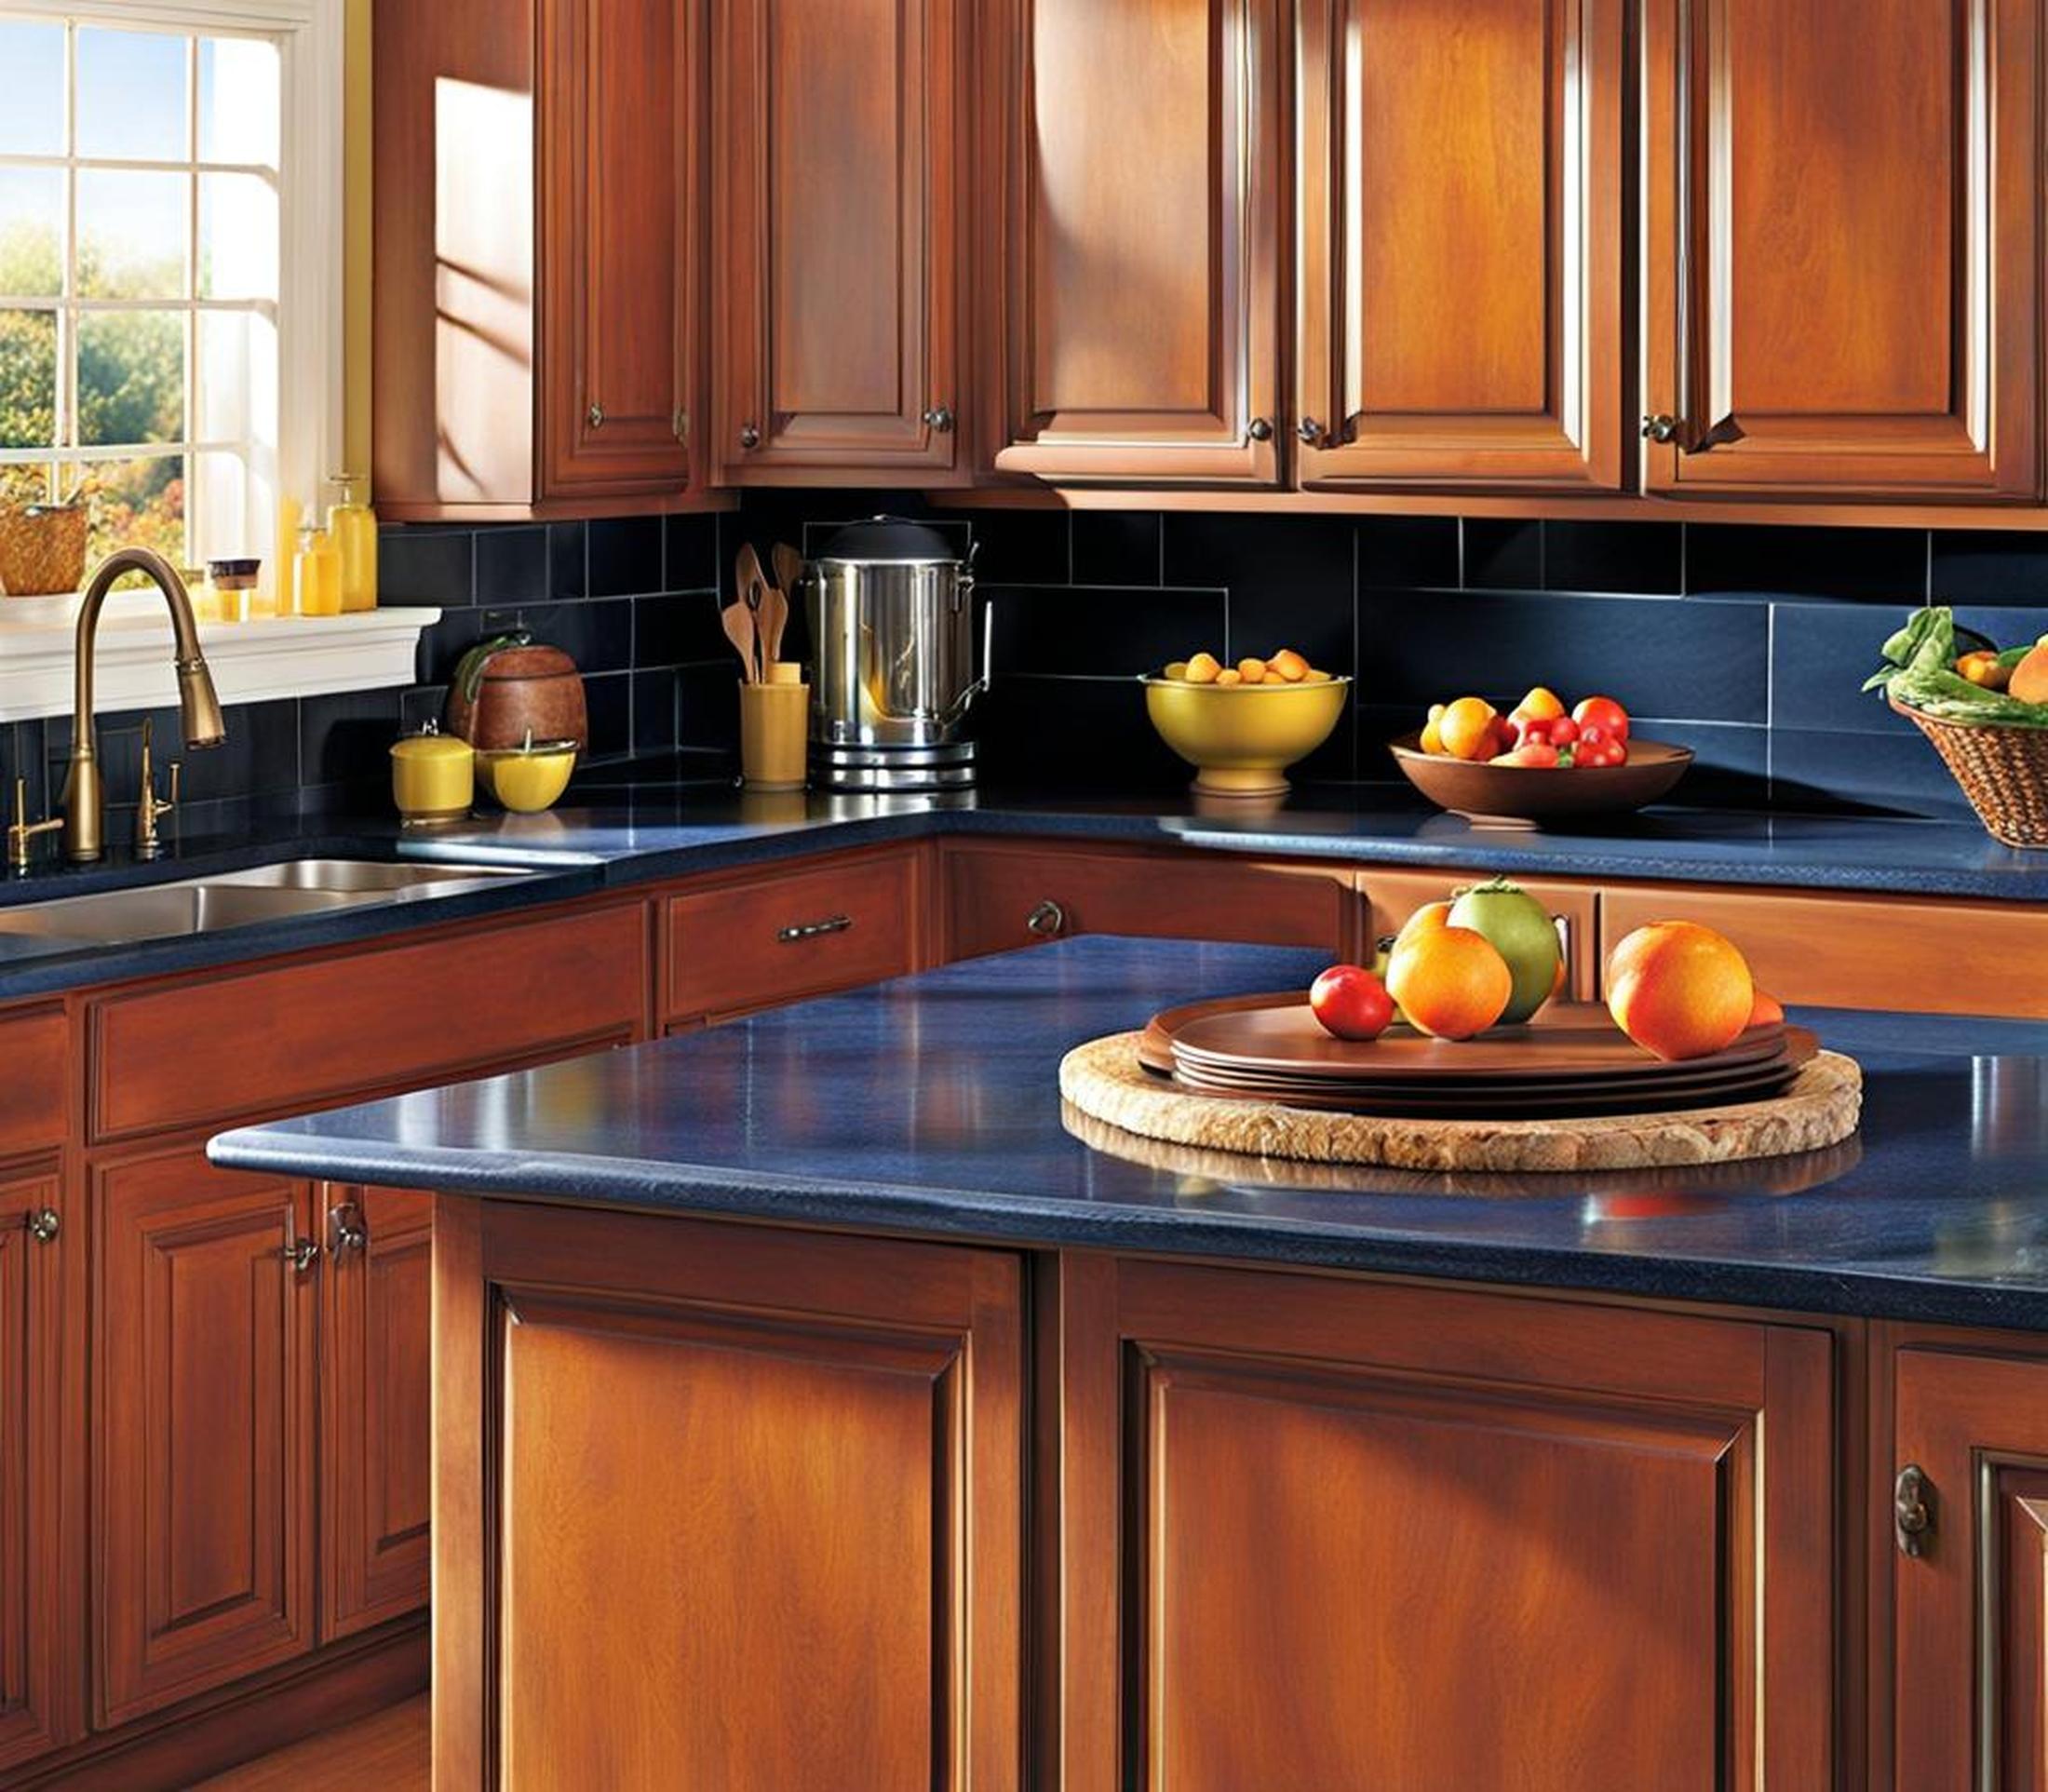 Painted Kitchen Counters: The Affordable Countertop Solution You Need